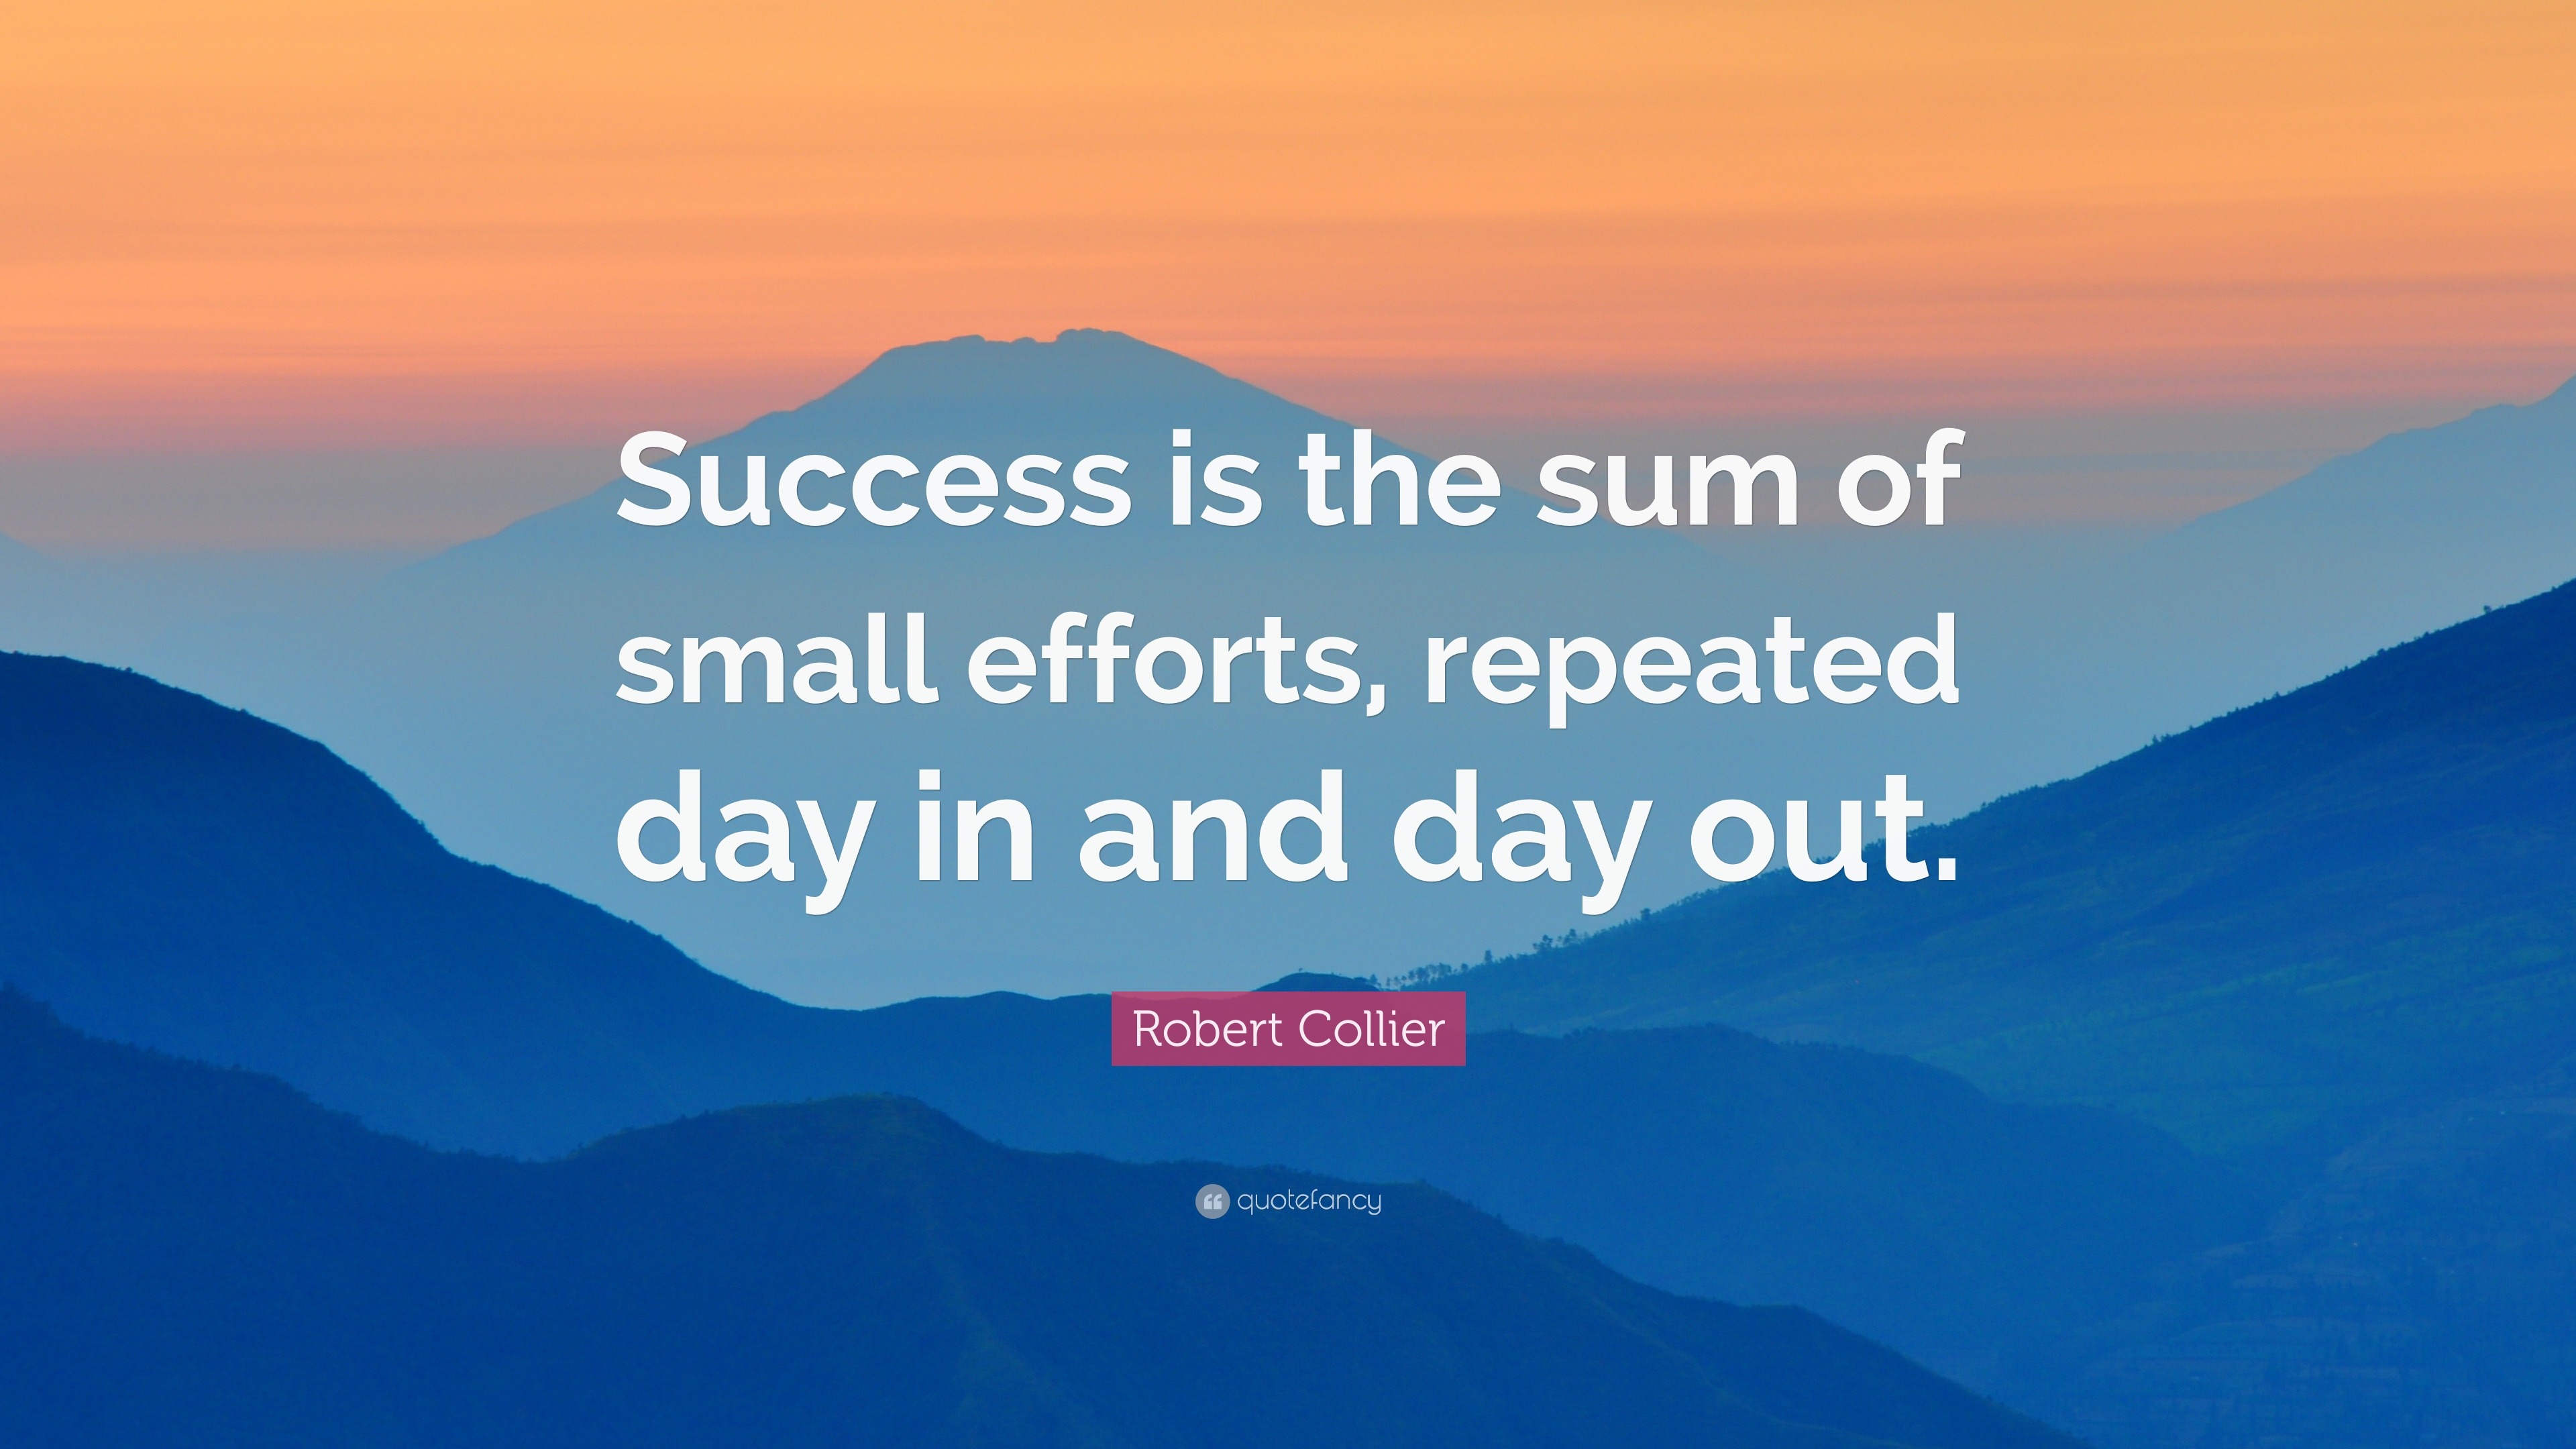 Robert Collier Quote: “Success is the sum of small efforts, repeated